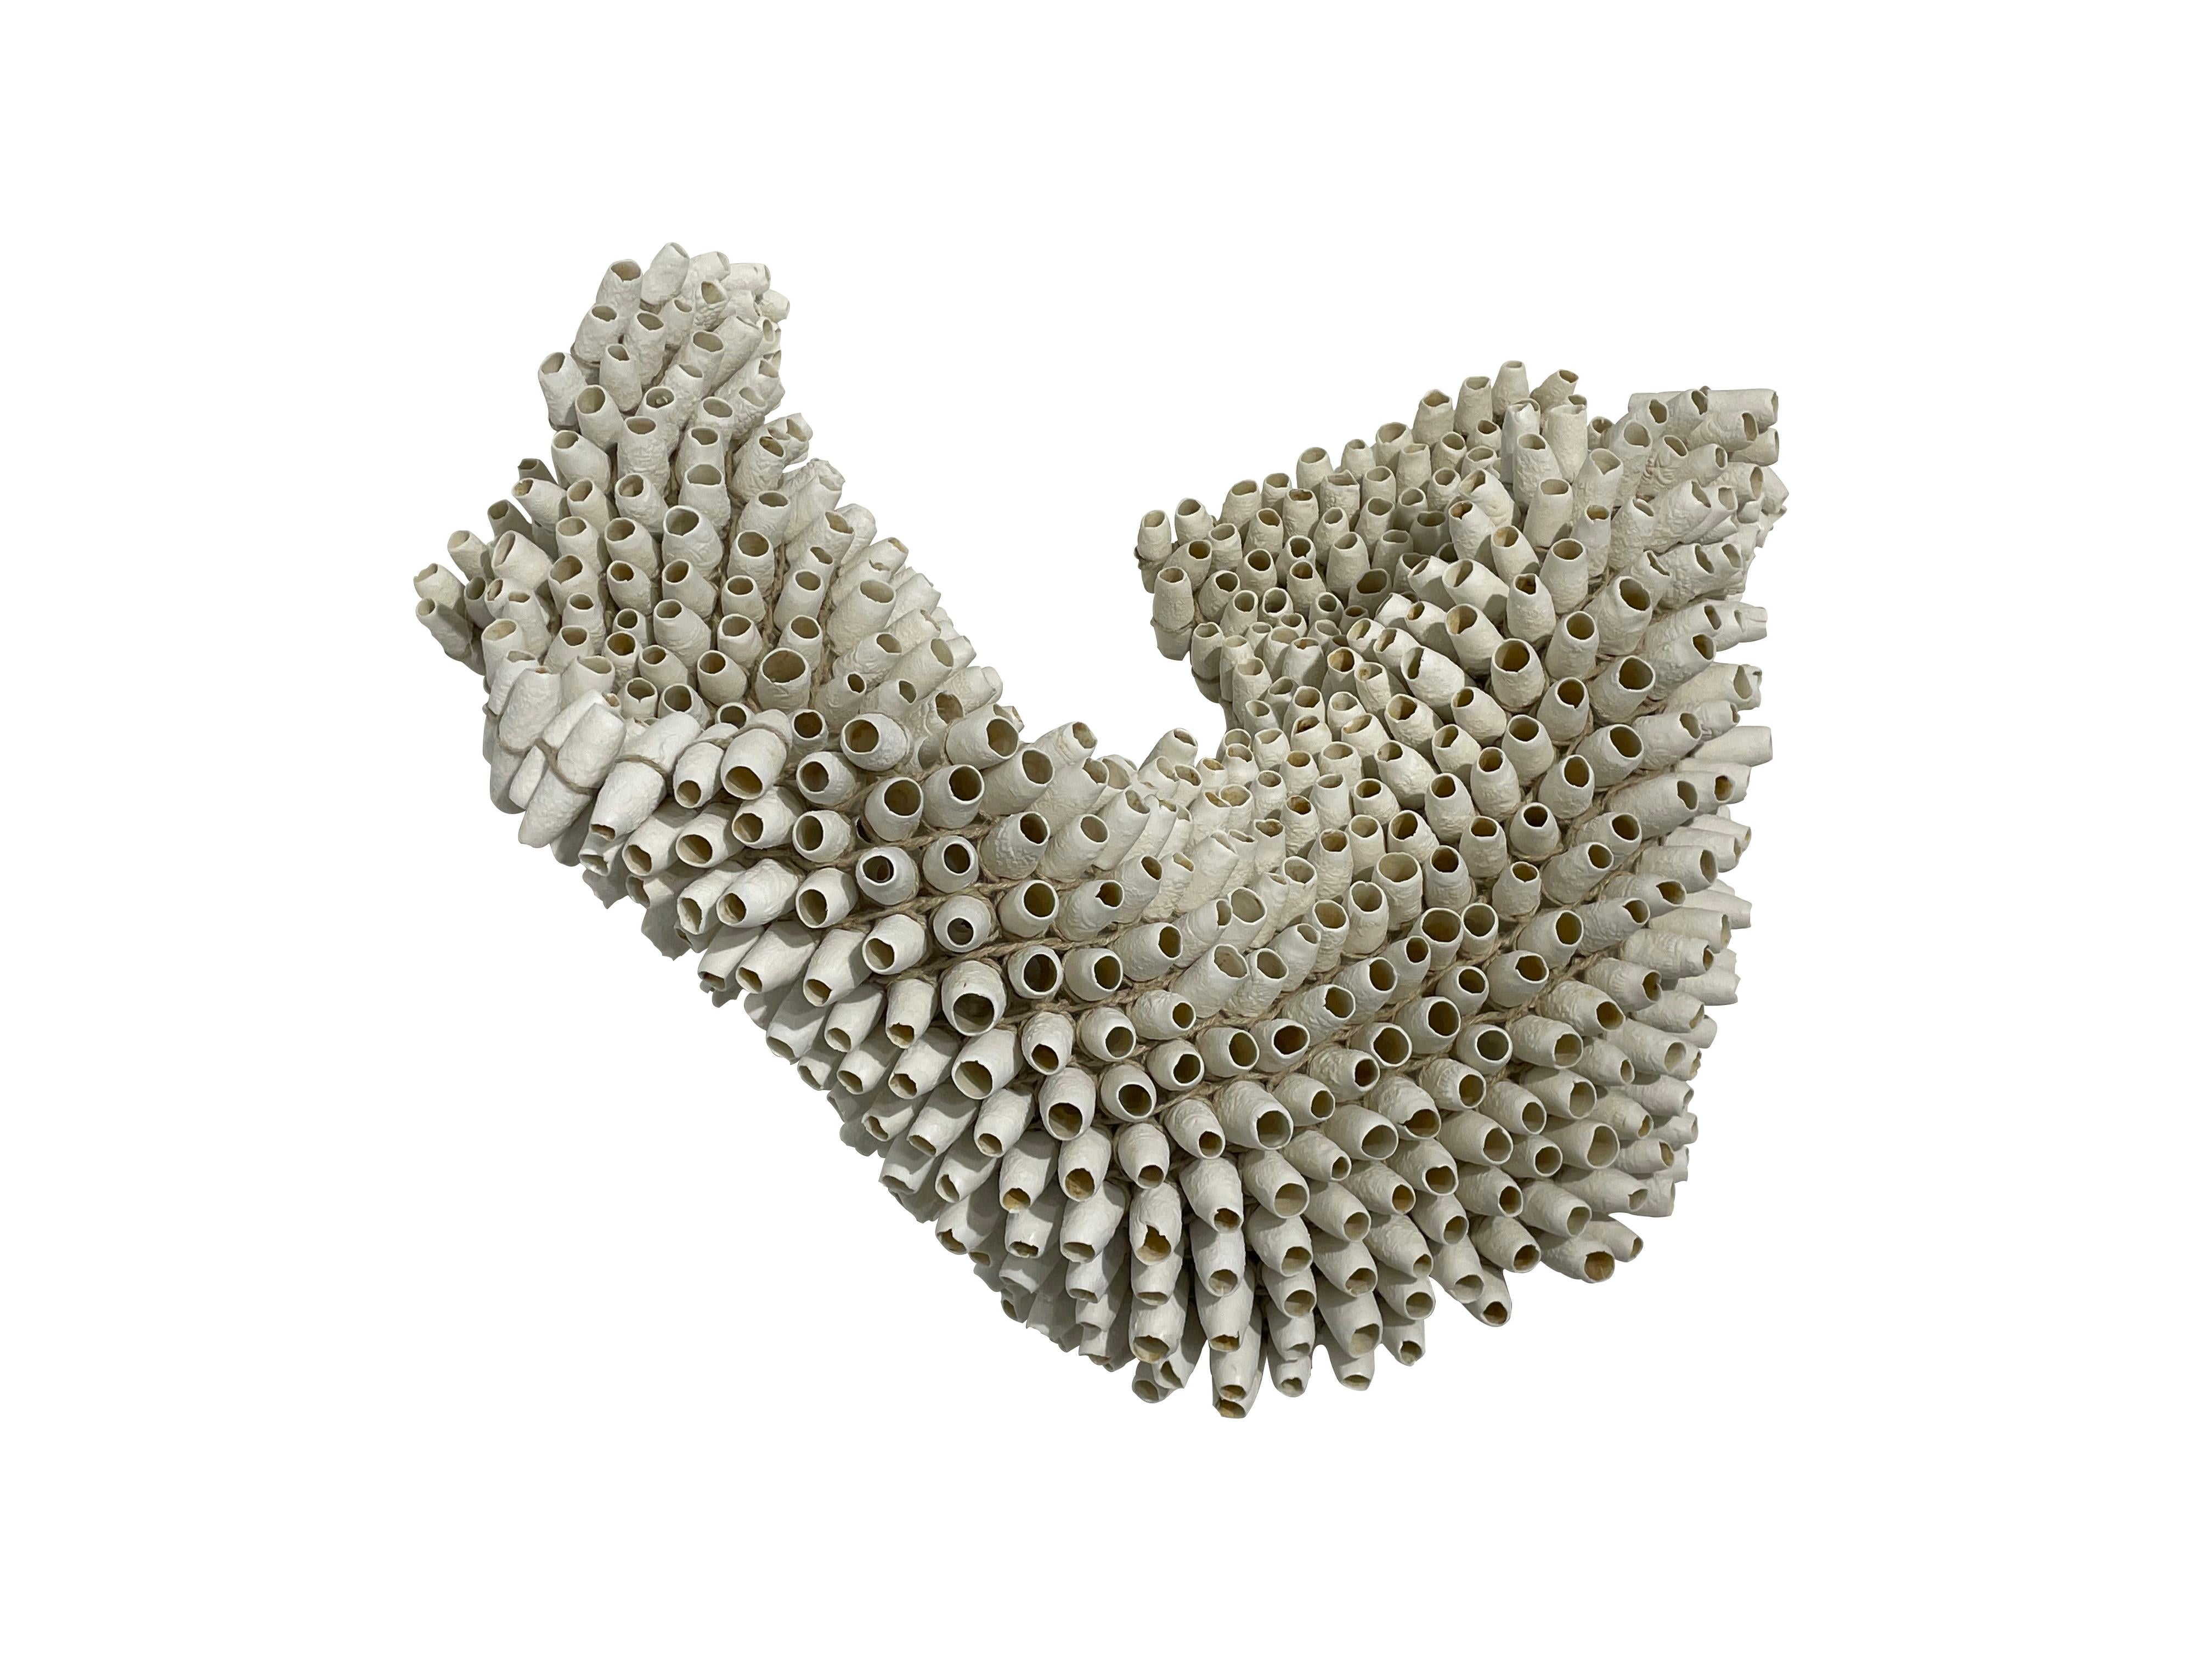 Contemporary French large handmade porcelain tubular sculpture.
Individual porcelain tubular shapes joined together.
Can be arranged in many different lengths and shapes.
Unique and decorative.
ARRIVING MARCH